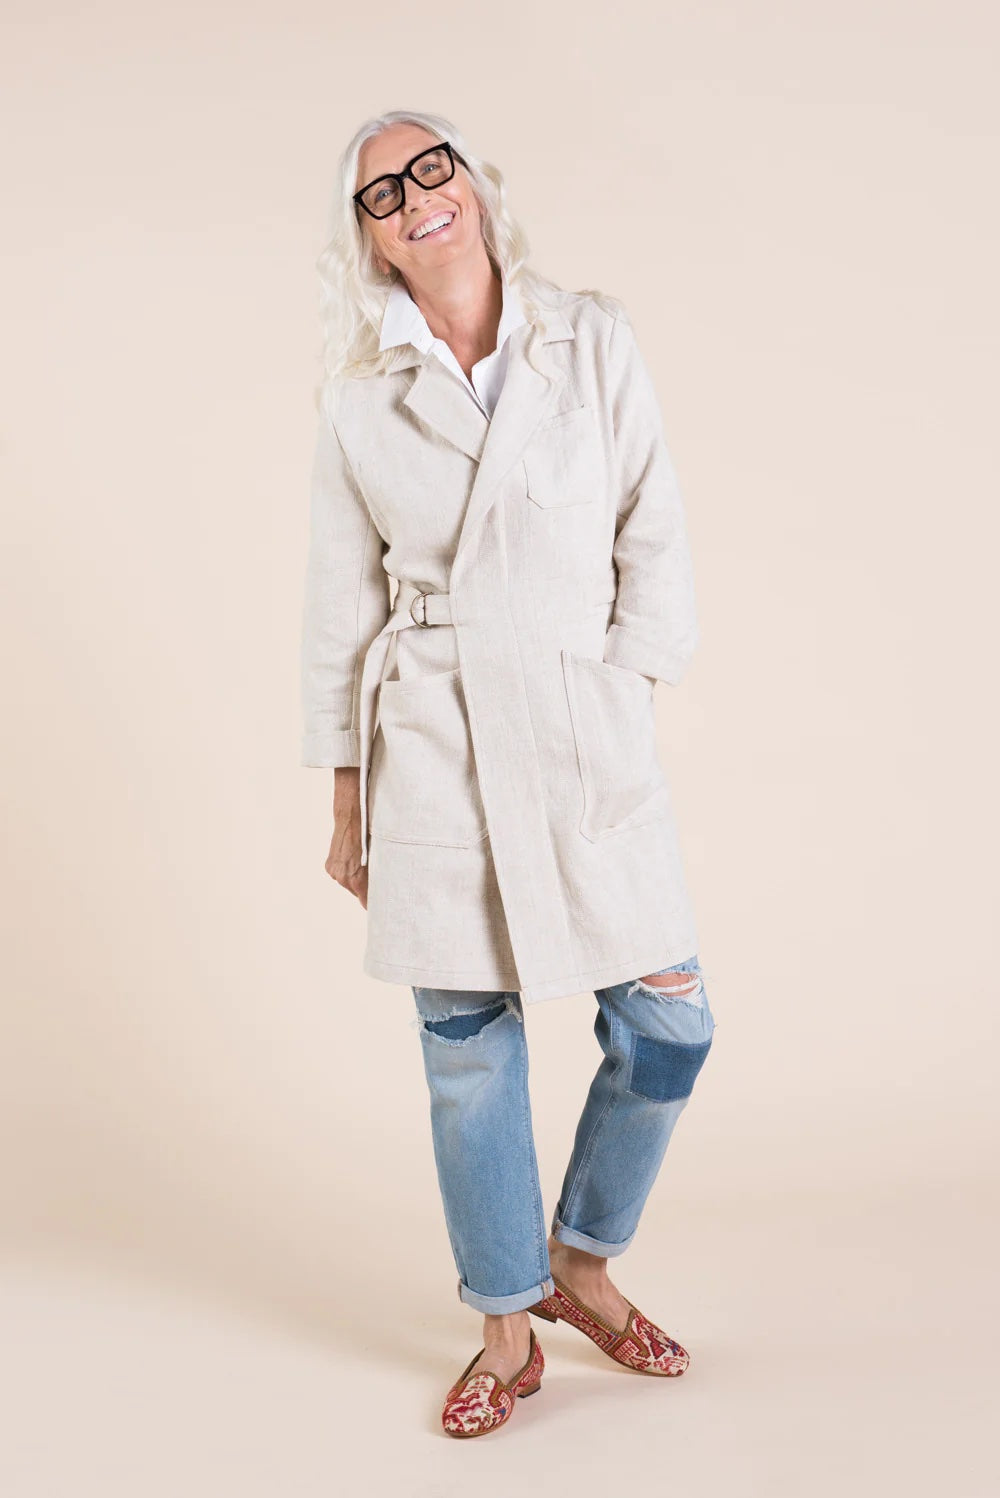 Woman wearing the Sienna Maker Jacket sewing pattern by Closet Core Patterns. A chic utility jacket pattern made in denim, twill, canvas or heavyweight linen fabric featuring slightly dropped shoulders, a crisp notch collar, deep front pockets, and a wais